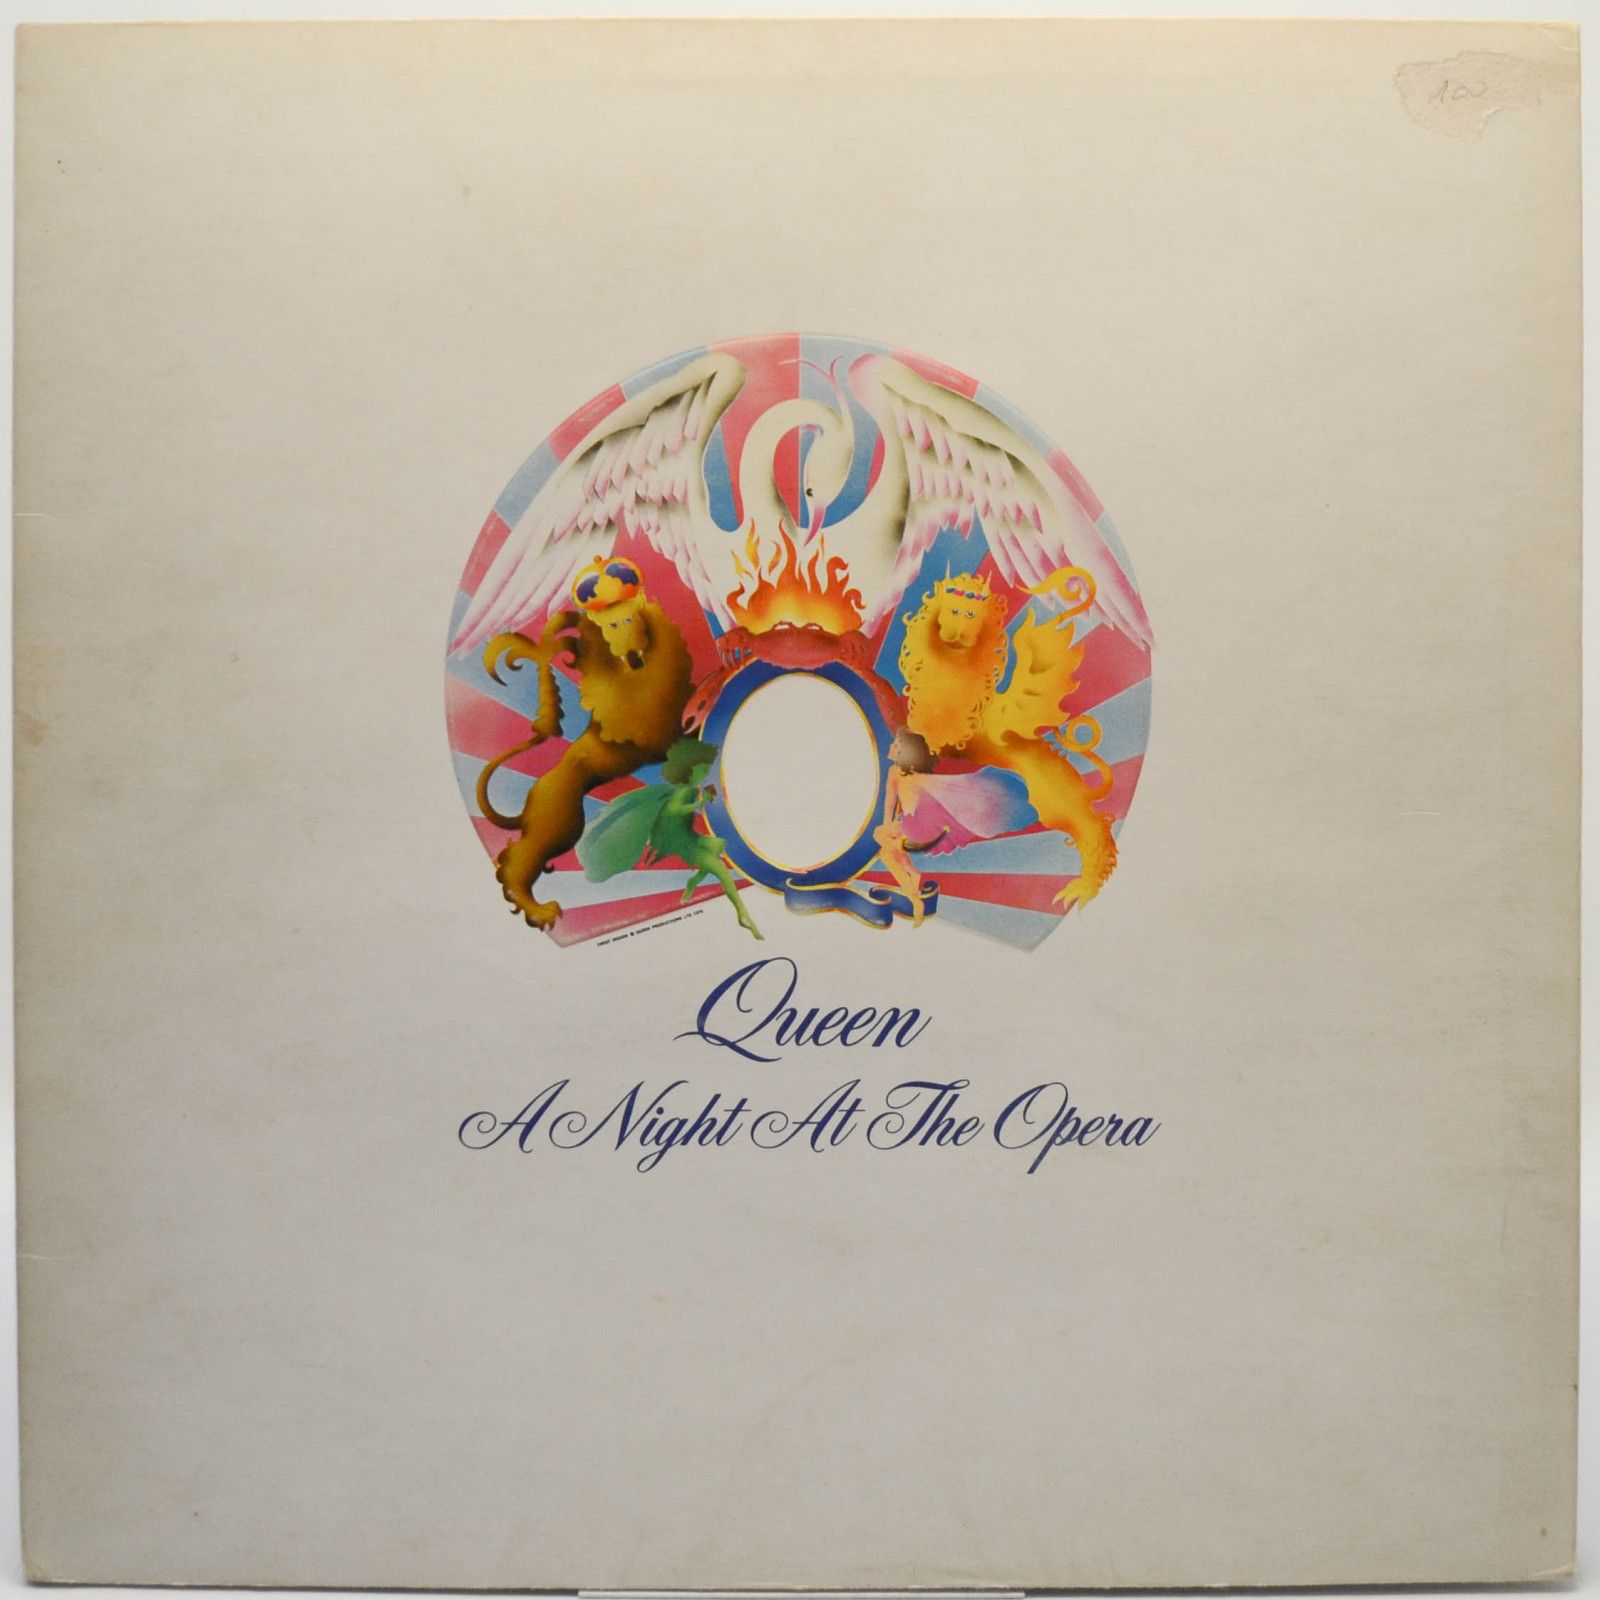 Queen — A Night At The Opera (UK), 1975